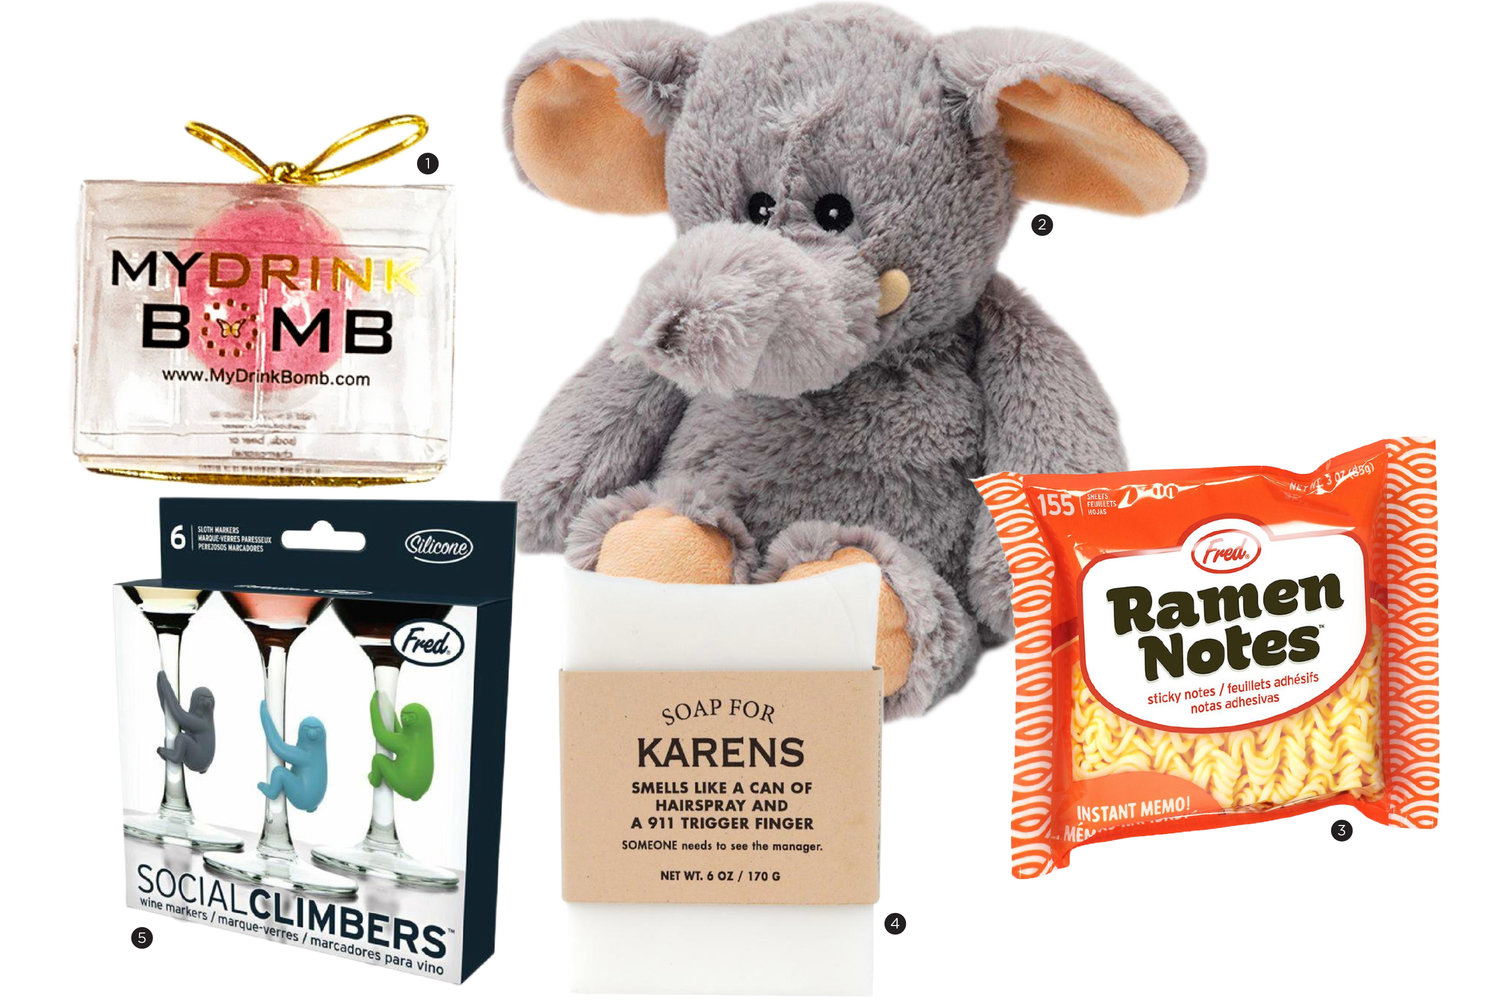 1. Drink Bomb 4-Pack; 2. Elephant Warmie; 3. Ramen Sticky Notes; 4. Soap for Karens; 5. Sloth Wine Markers